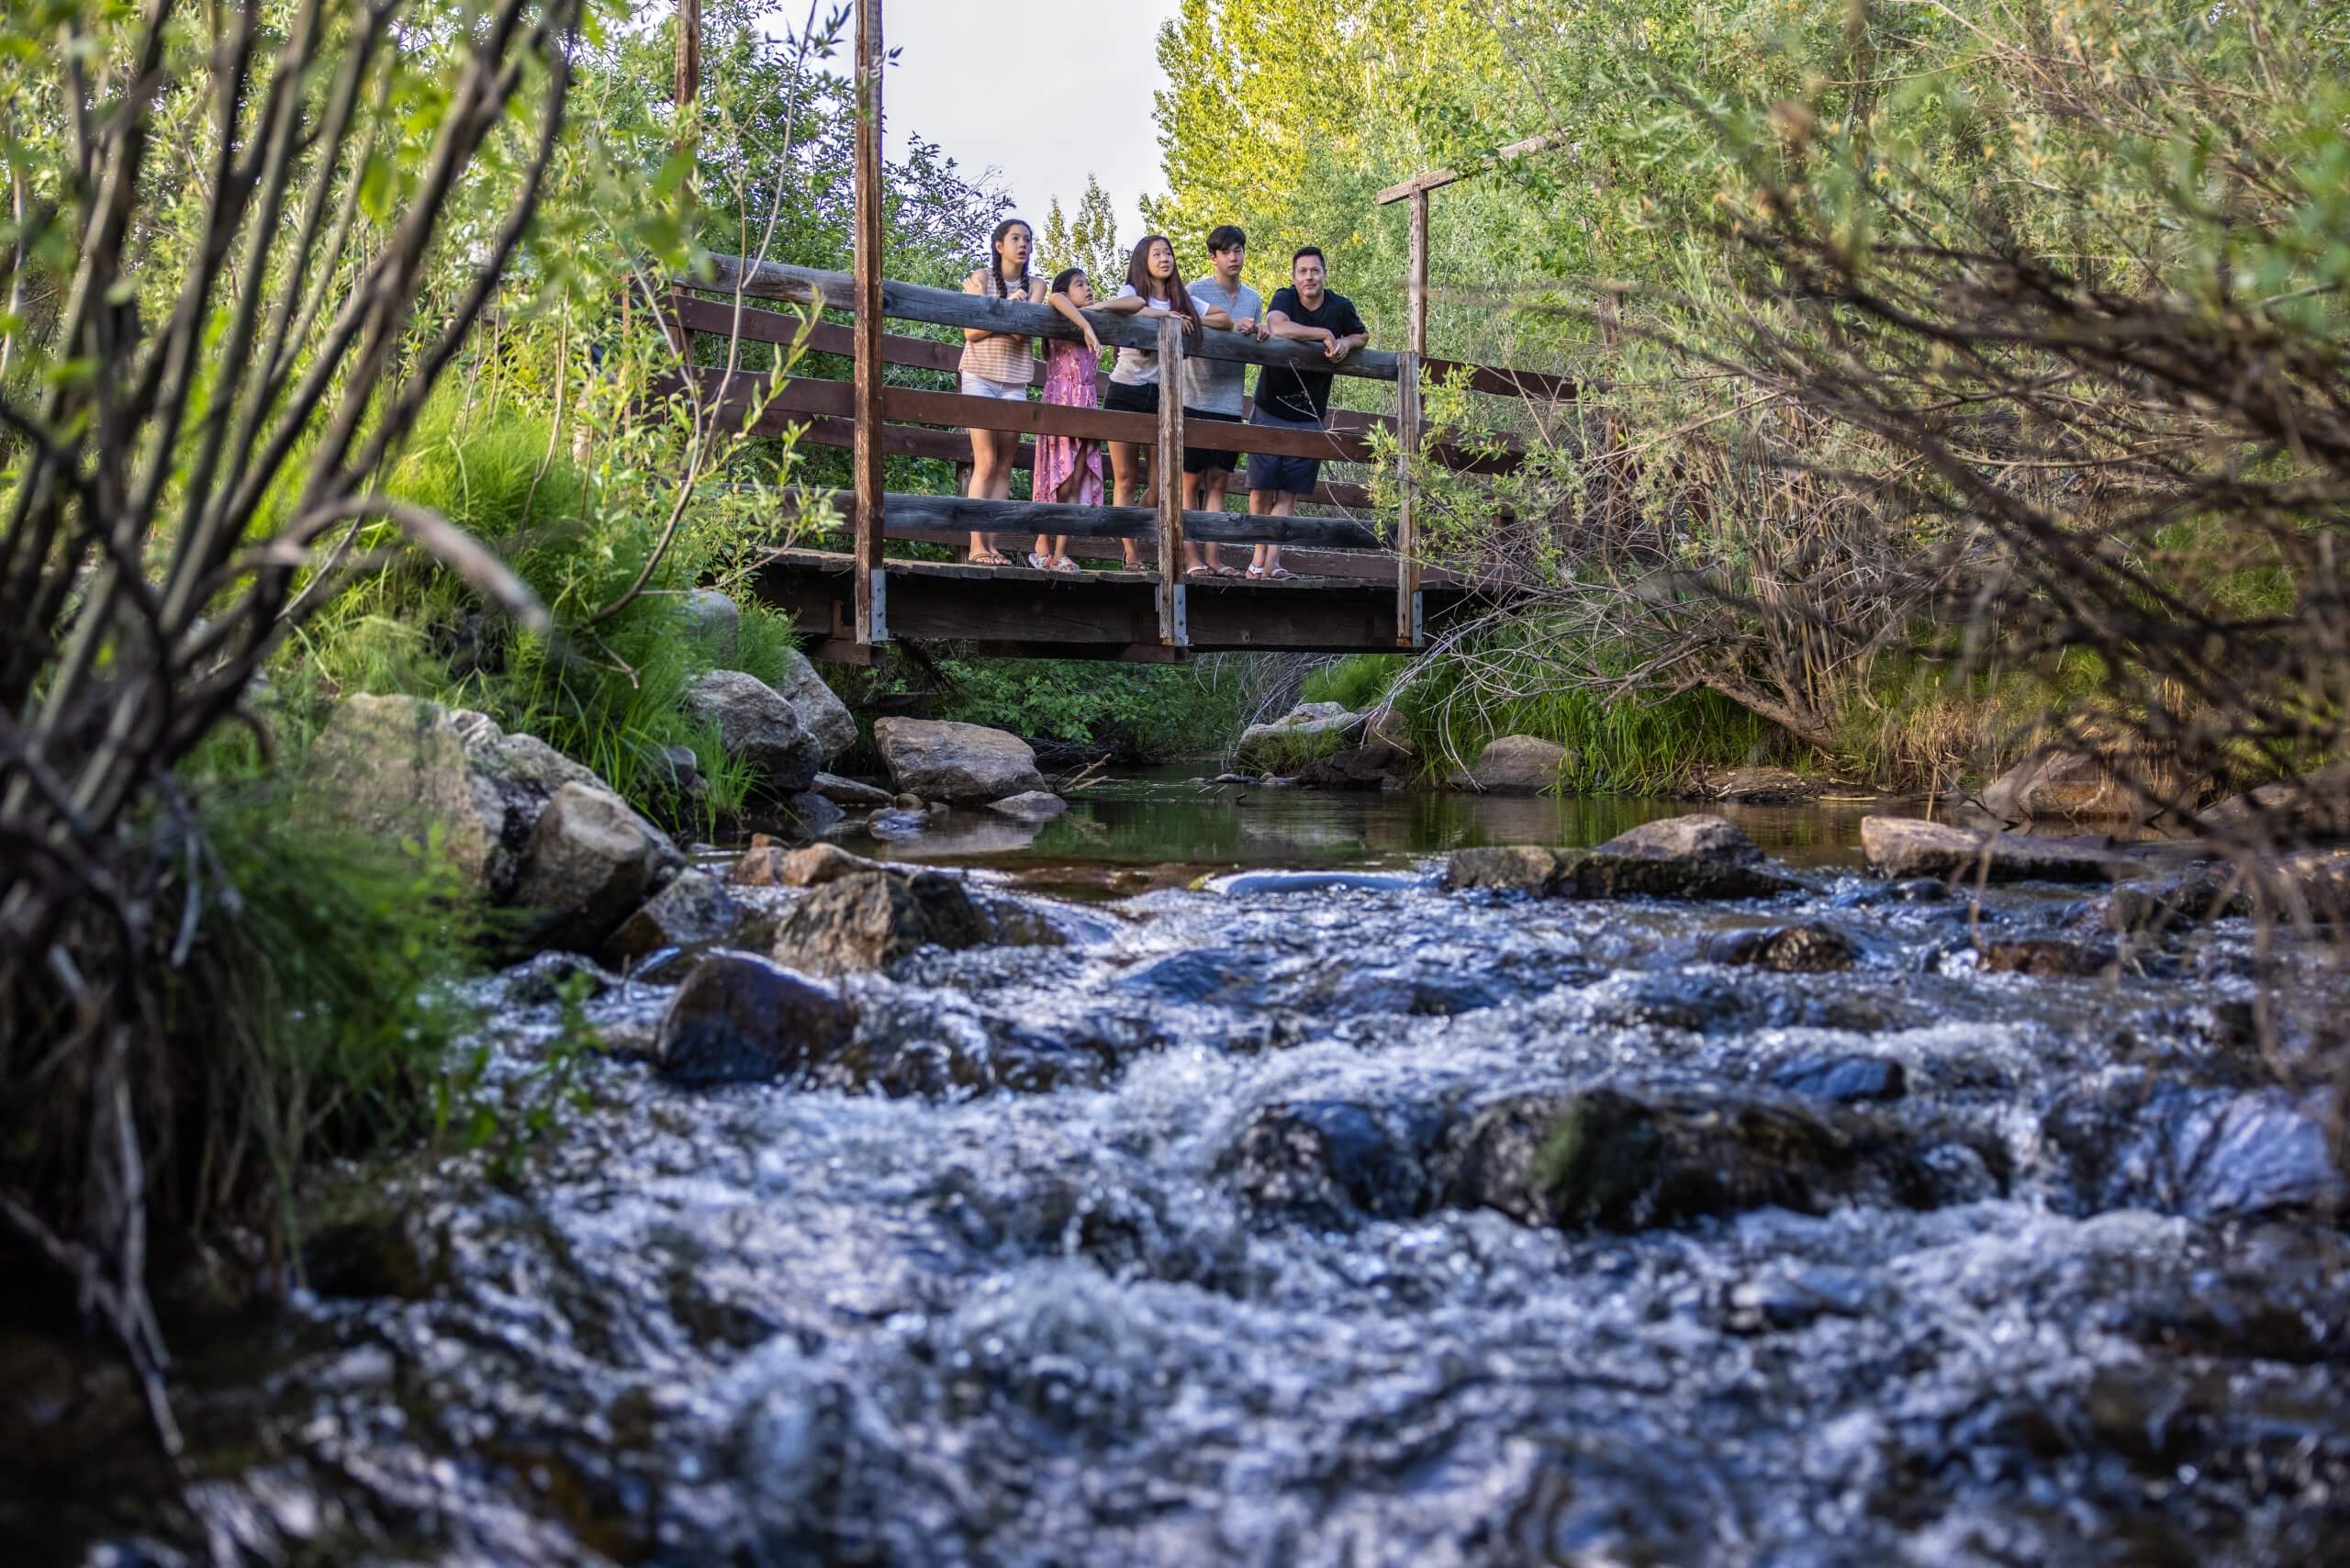 a group of people standing on a wooden bridge crossing a river in a forest, along the Buena Vista Trail